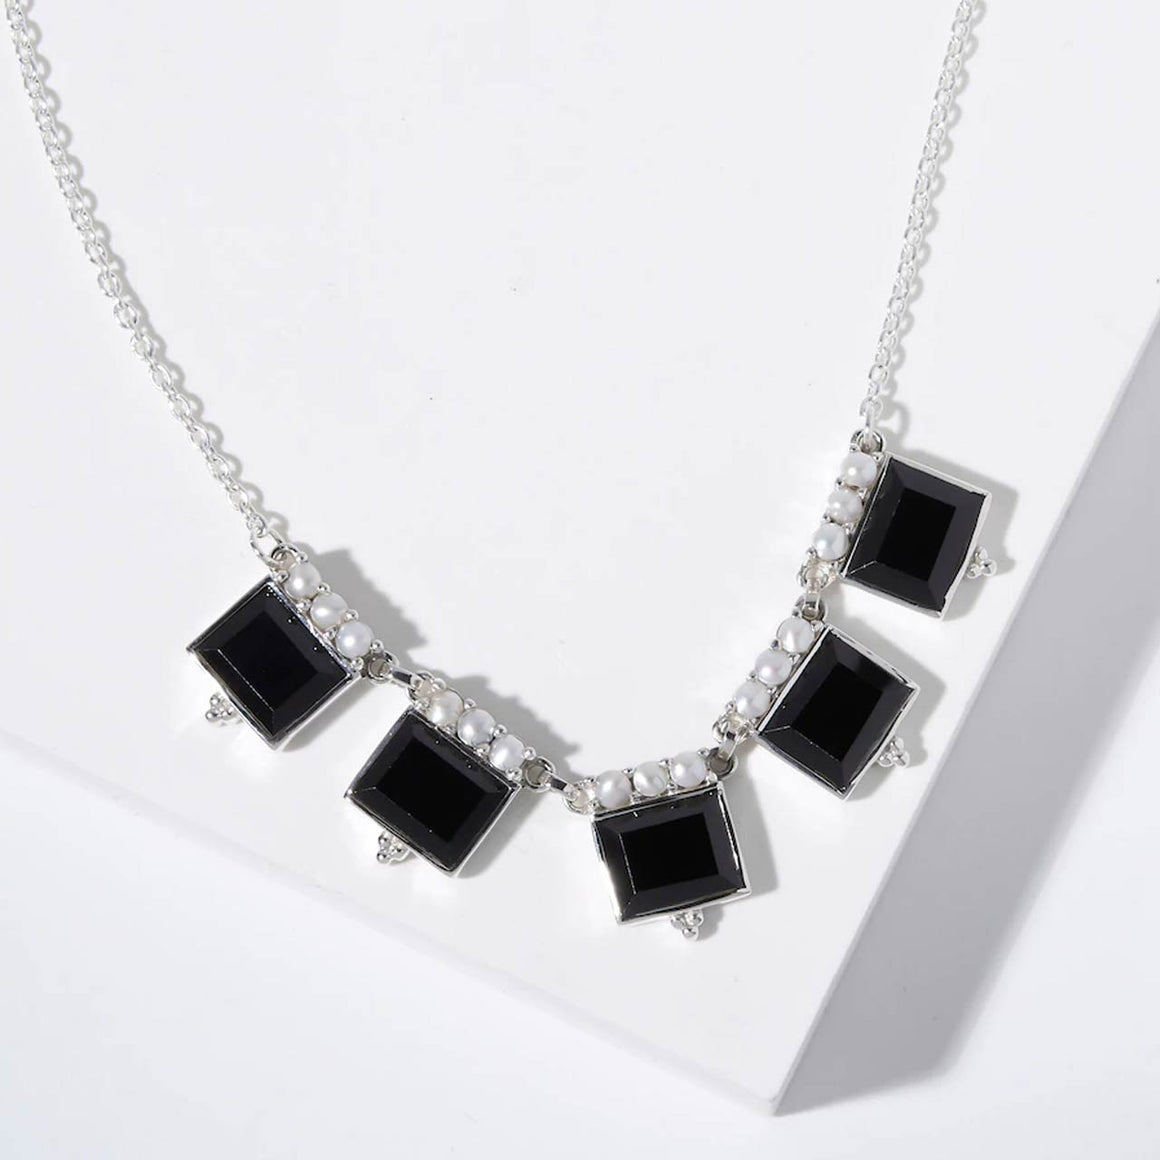 Faceted Black Spinel & Freshwater Pearl Necklace